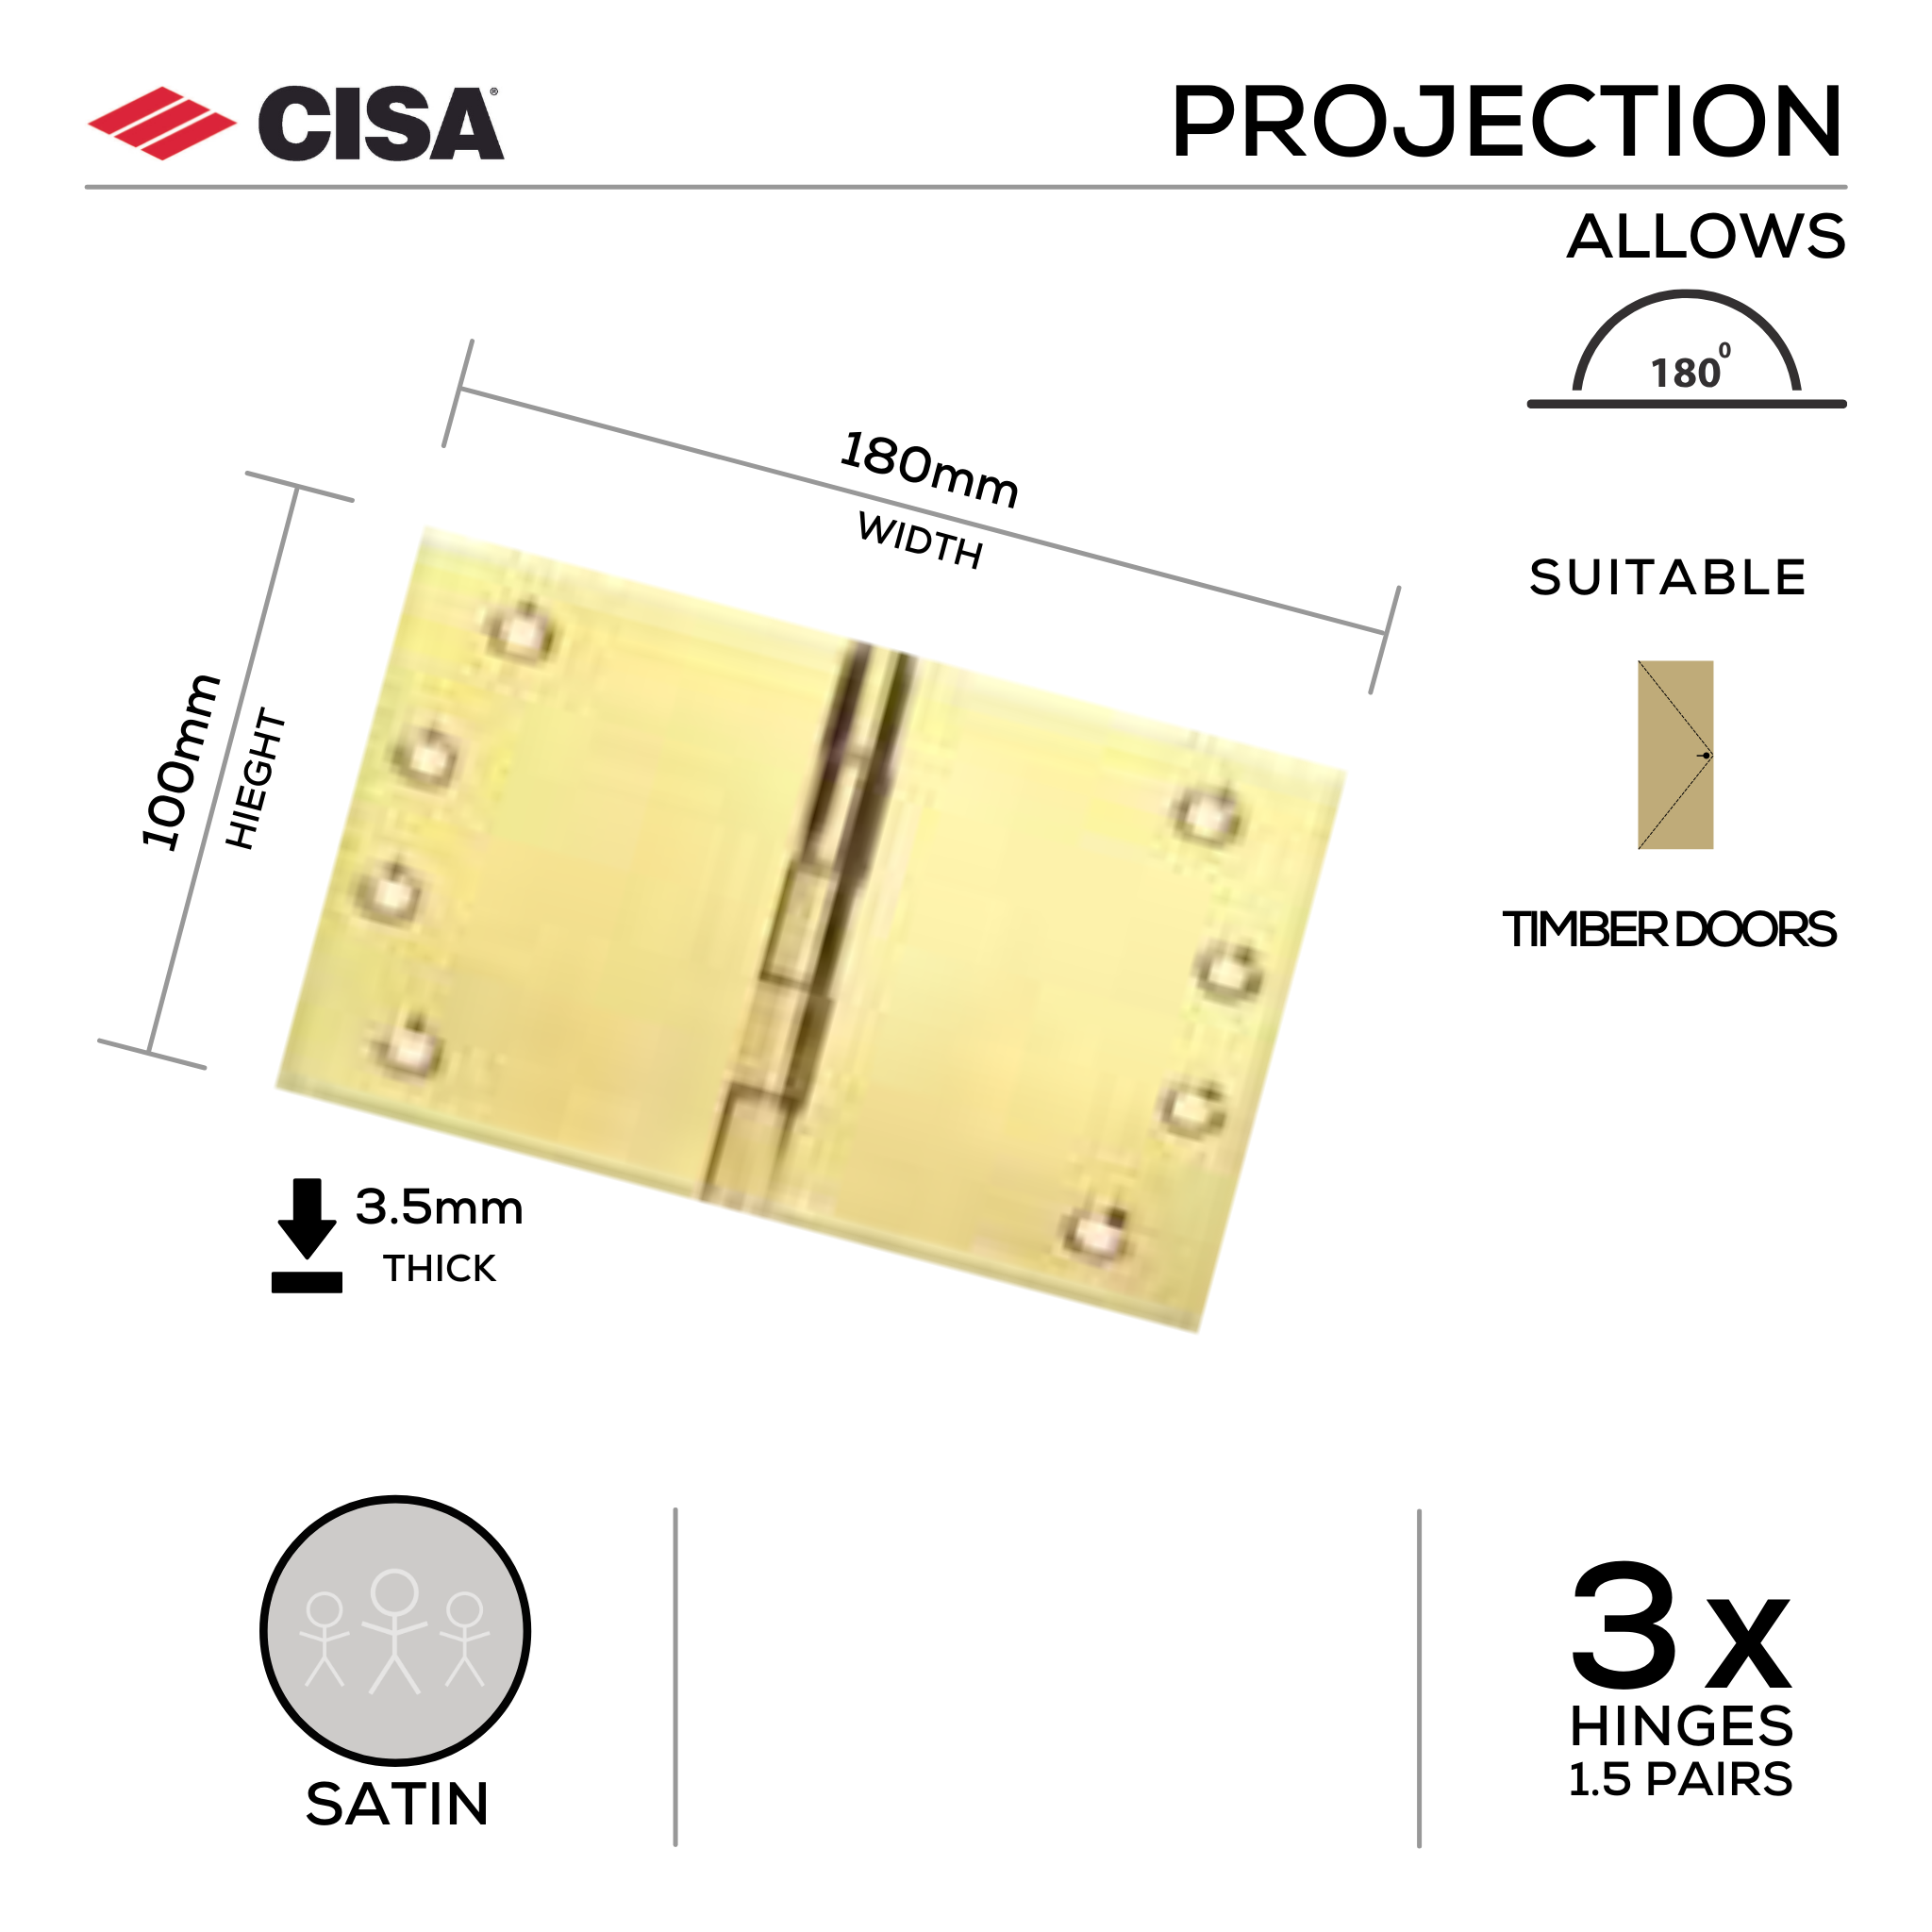 FH180X3, Projection Hinge, 2 x Hinges (1 Pair), 100mm (h) x 180mm (w) x 3.5mm (t), Satin, CISA